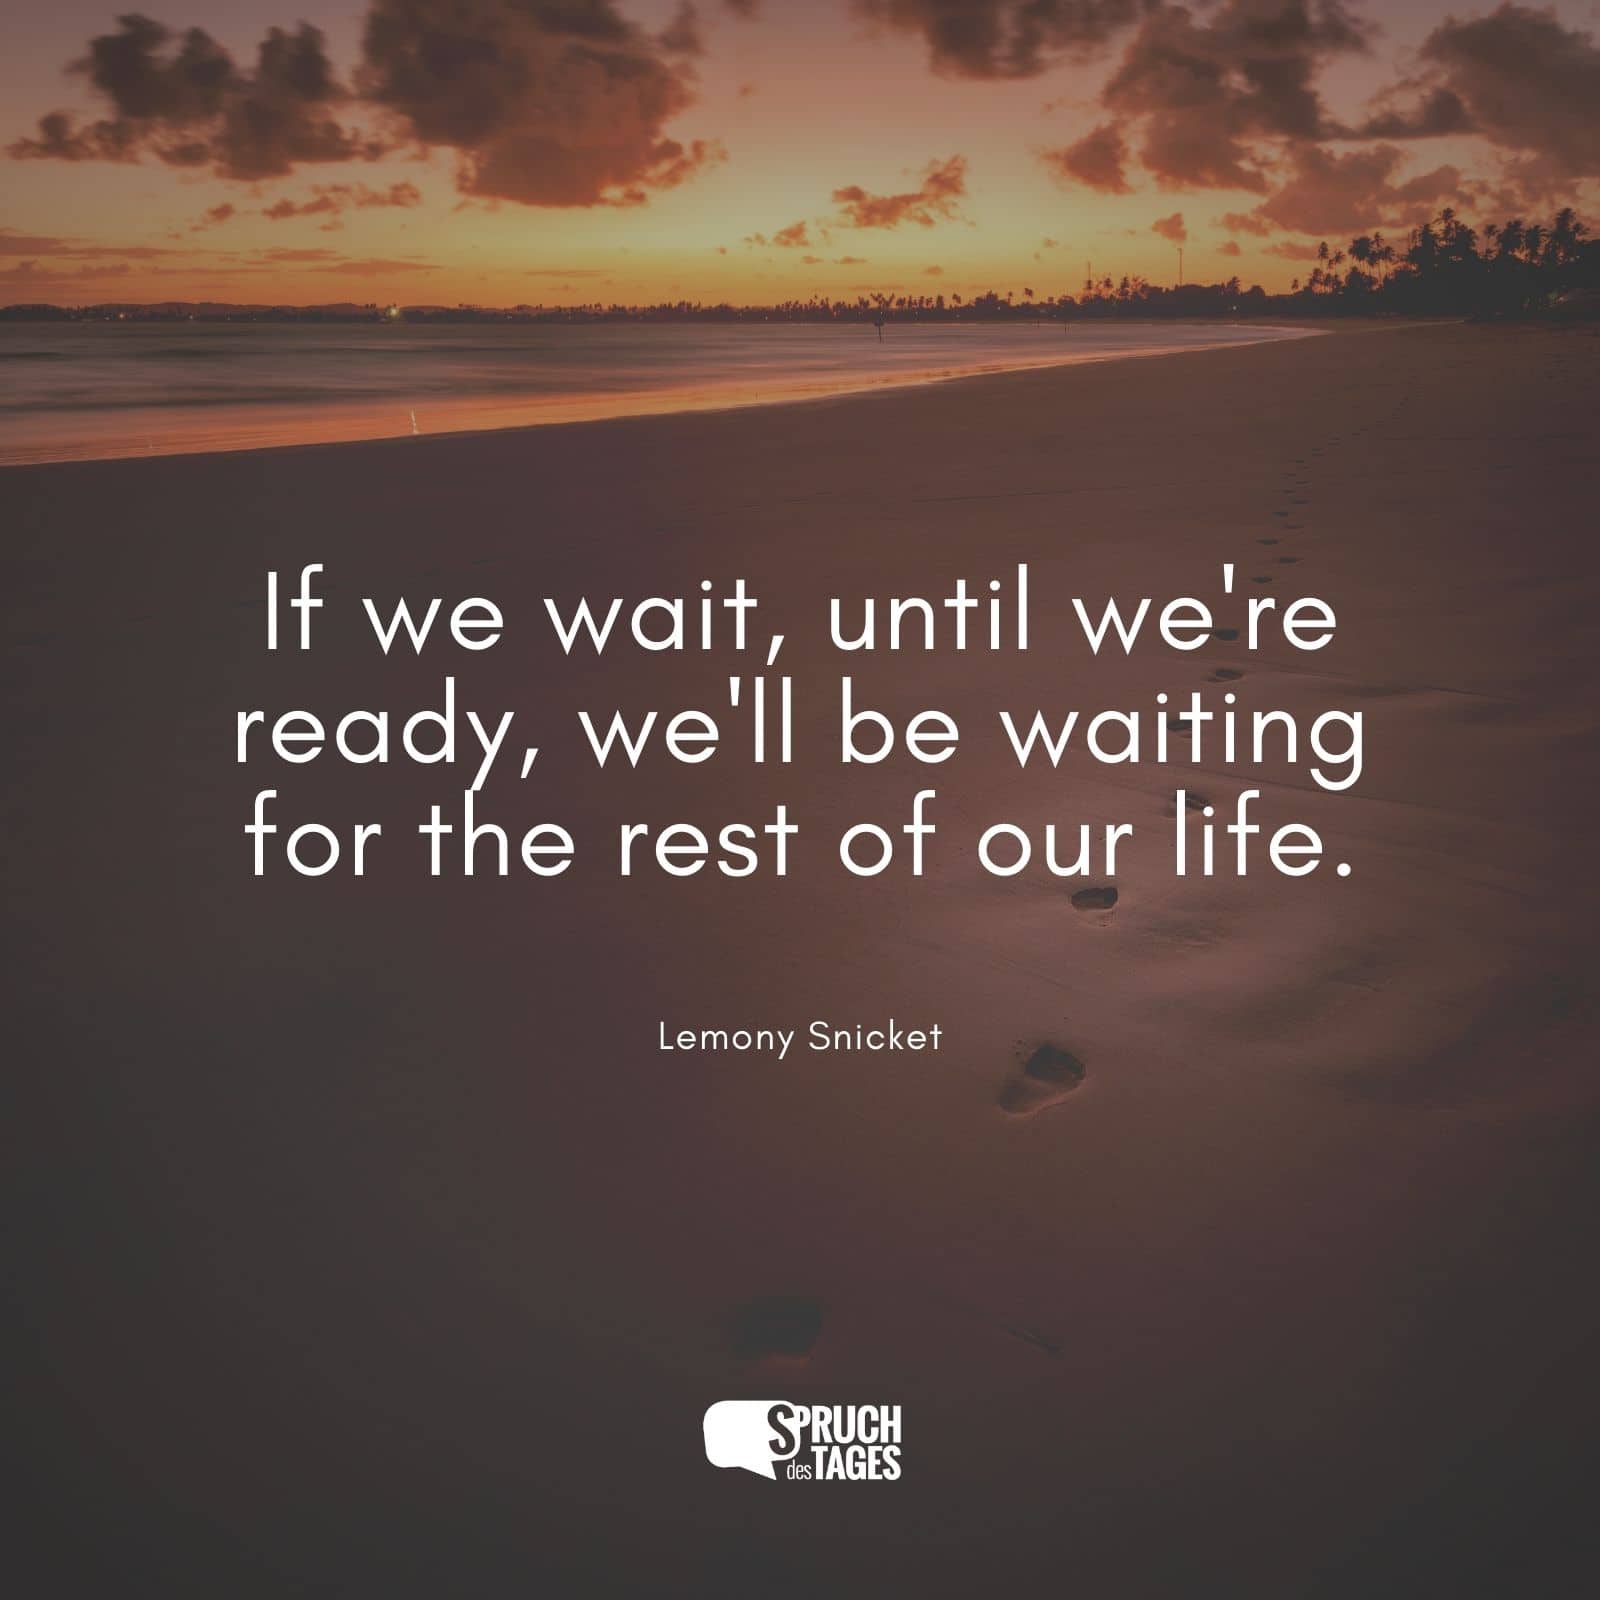 If we wait, until we’re ready, we’ll be waiting for the rest of our life.